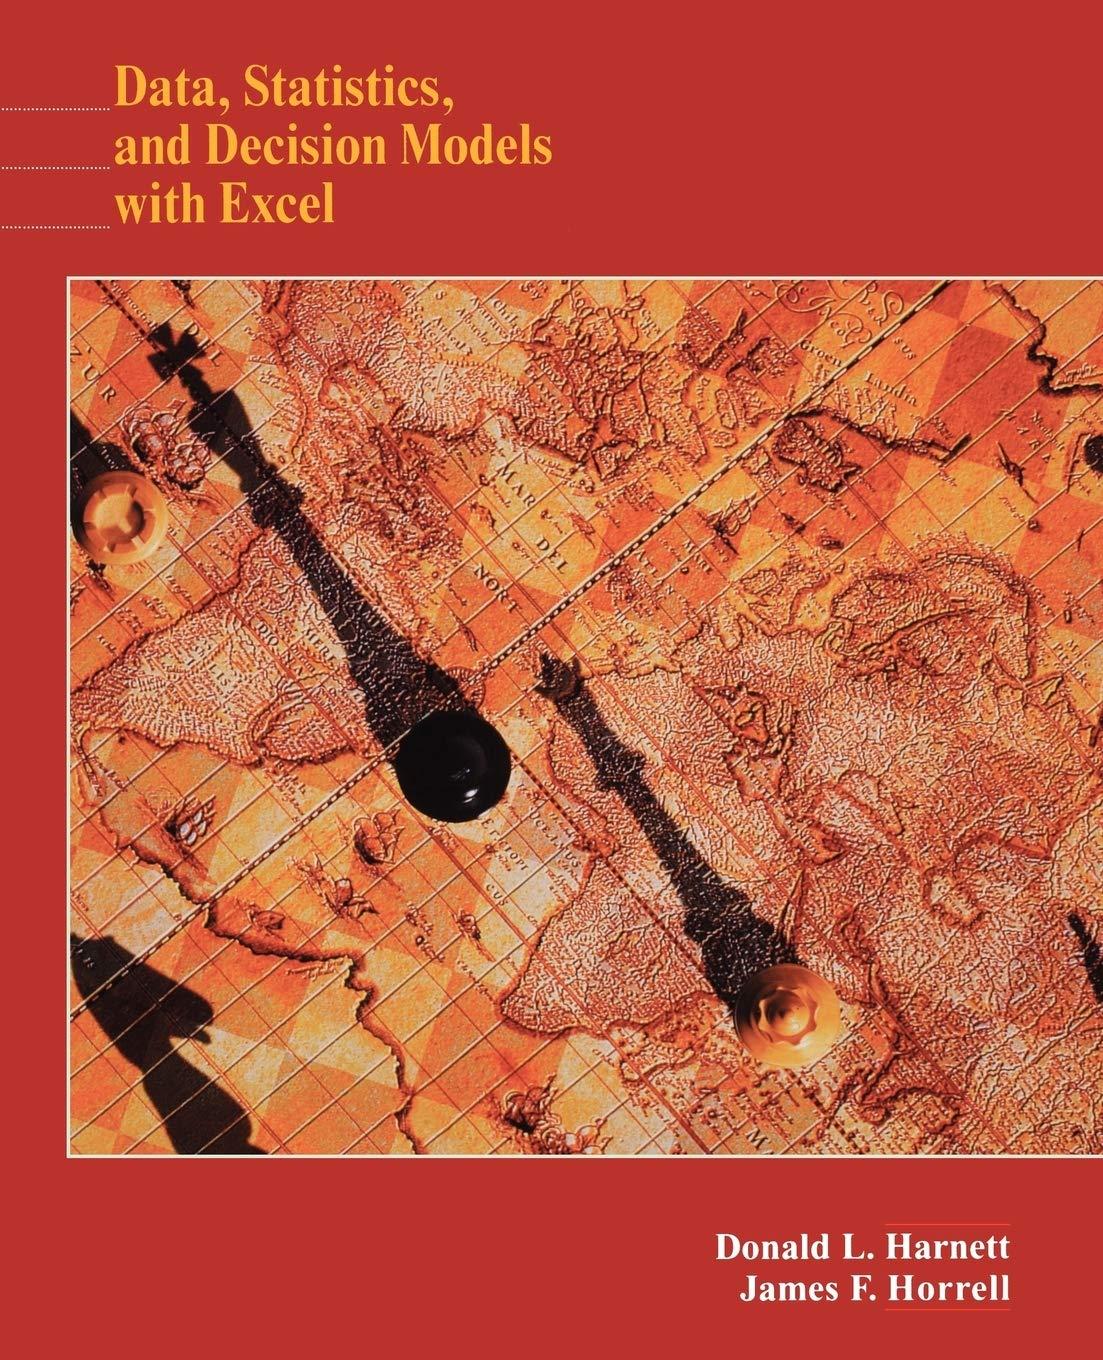 data statistics and decision models with excel 1st edition donald l. harnett, james f. horrell 0471133981,